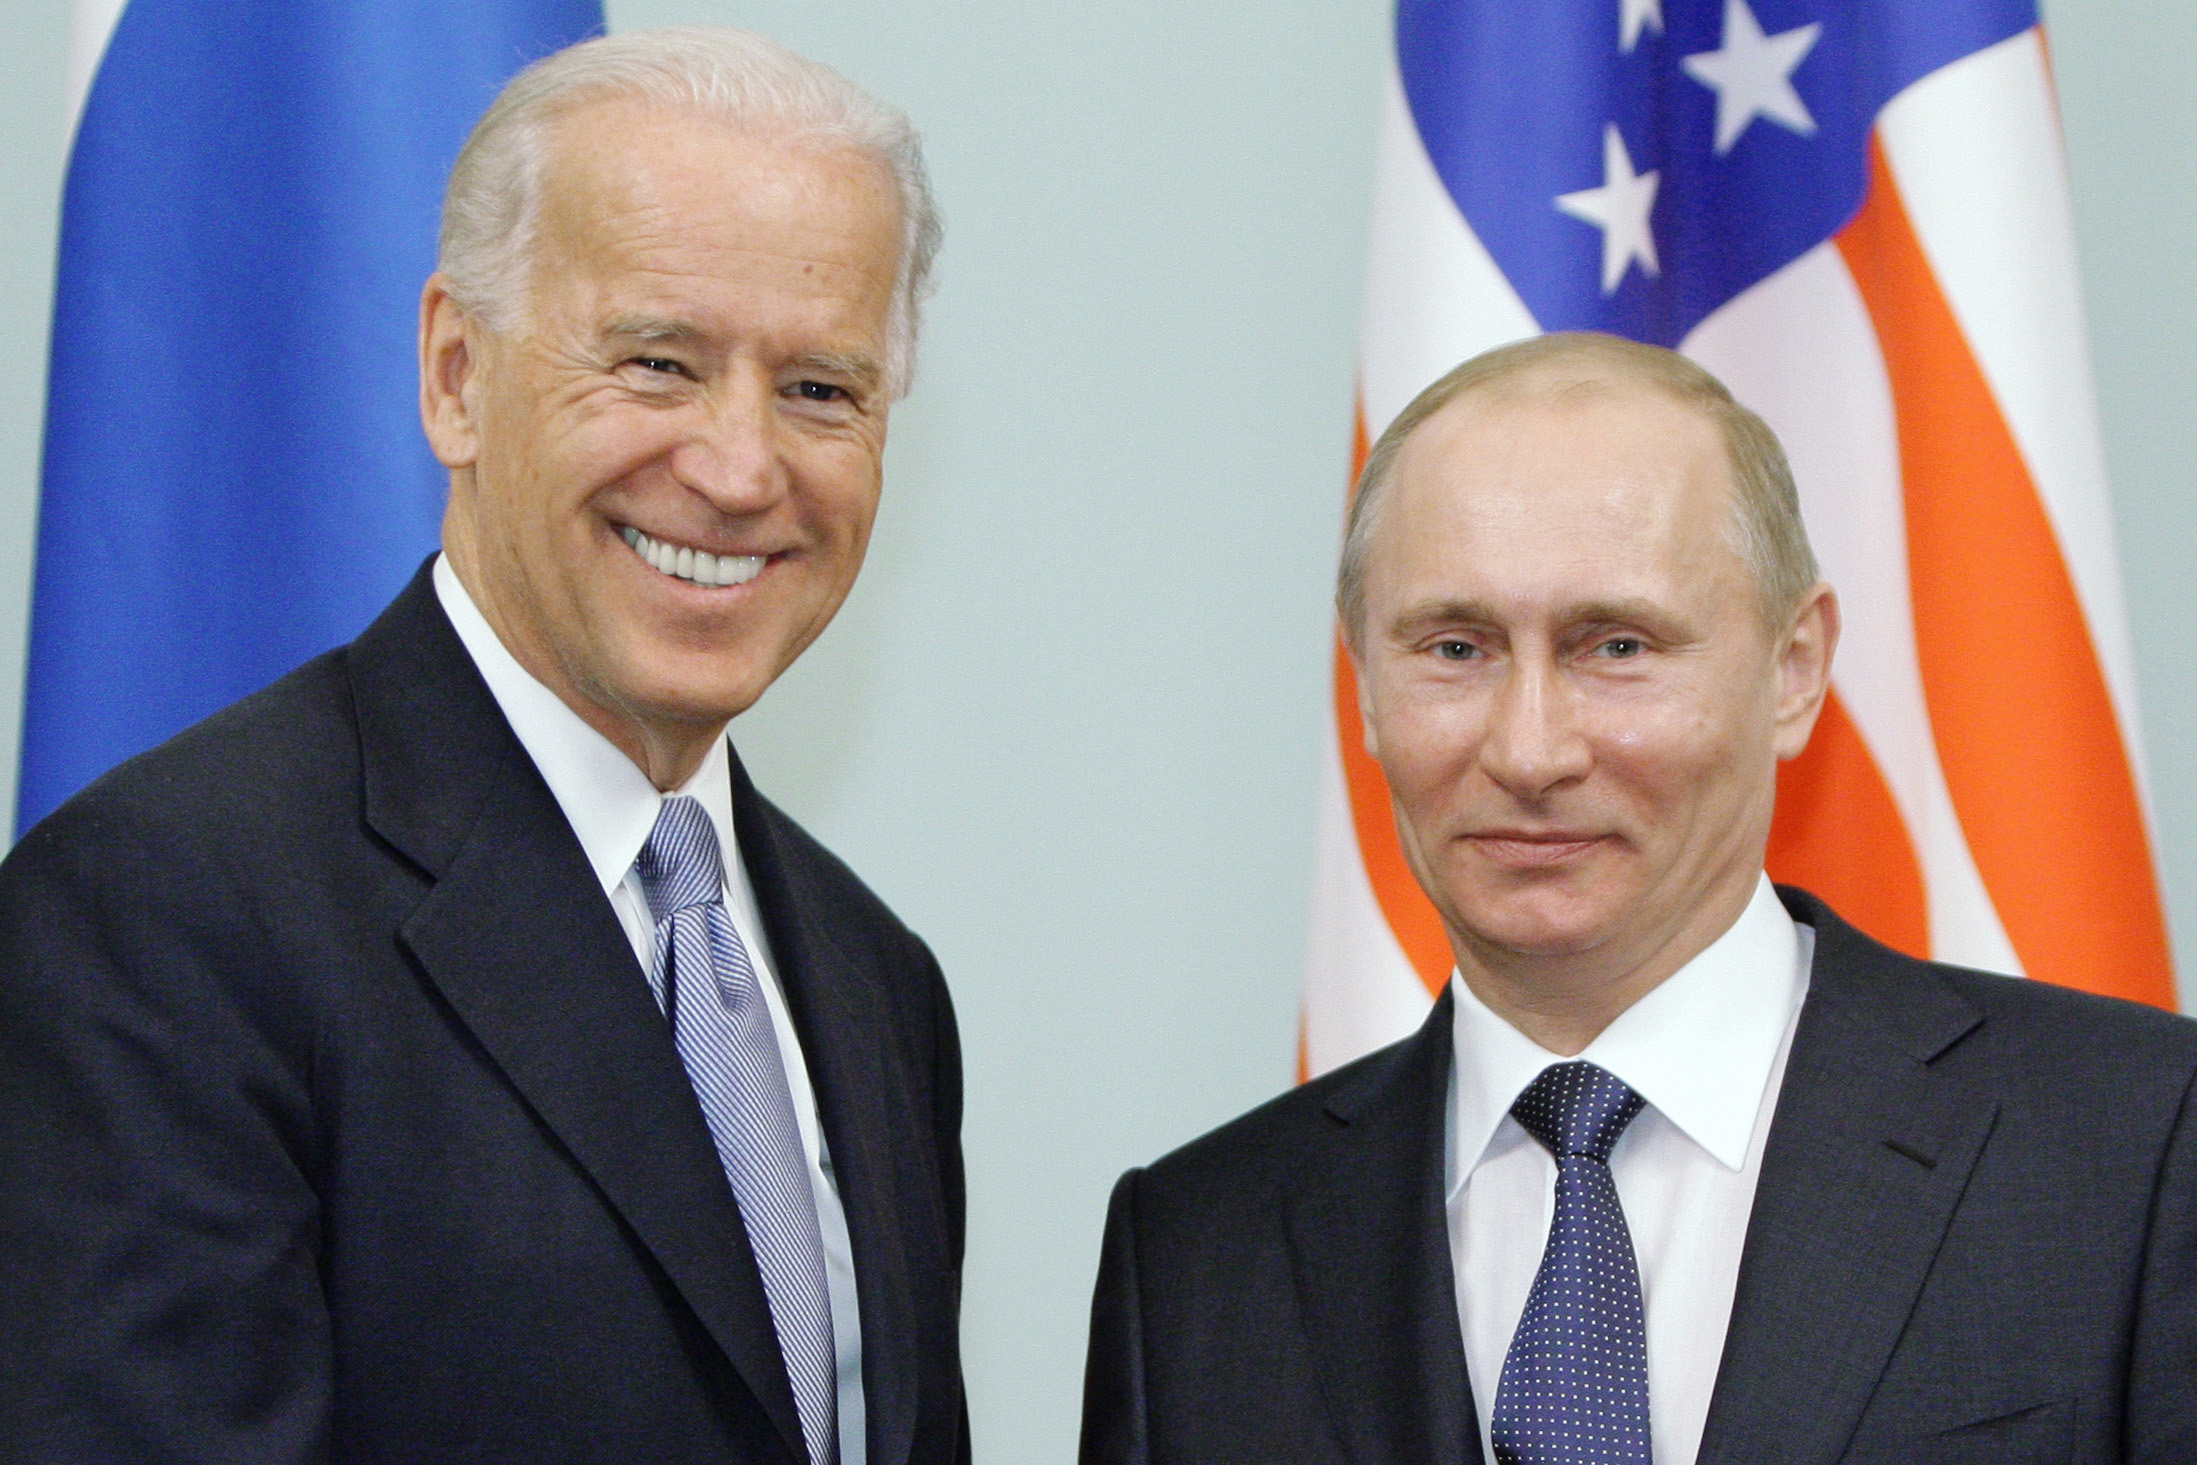 PHOTO: Then Vice President Joe Biden, left, shakes hands with Russian Prime Minister Vladimir Putin in Moscow, Russia, March 10, 2011.